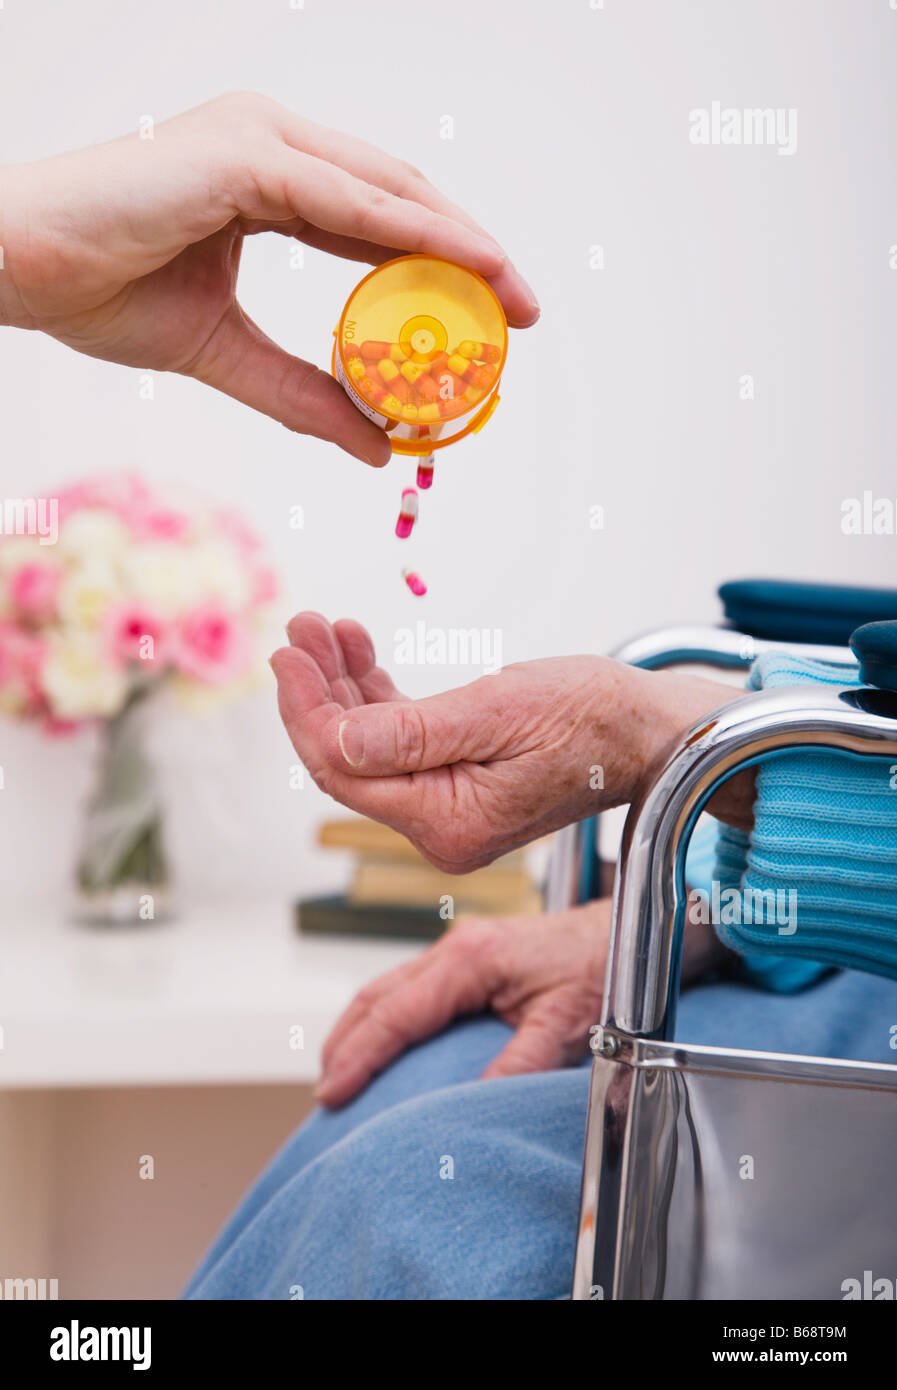 Young woman giving pills to senior woman, close-up of hands Stock Photo